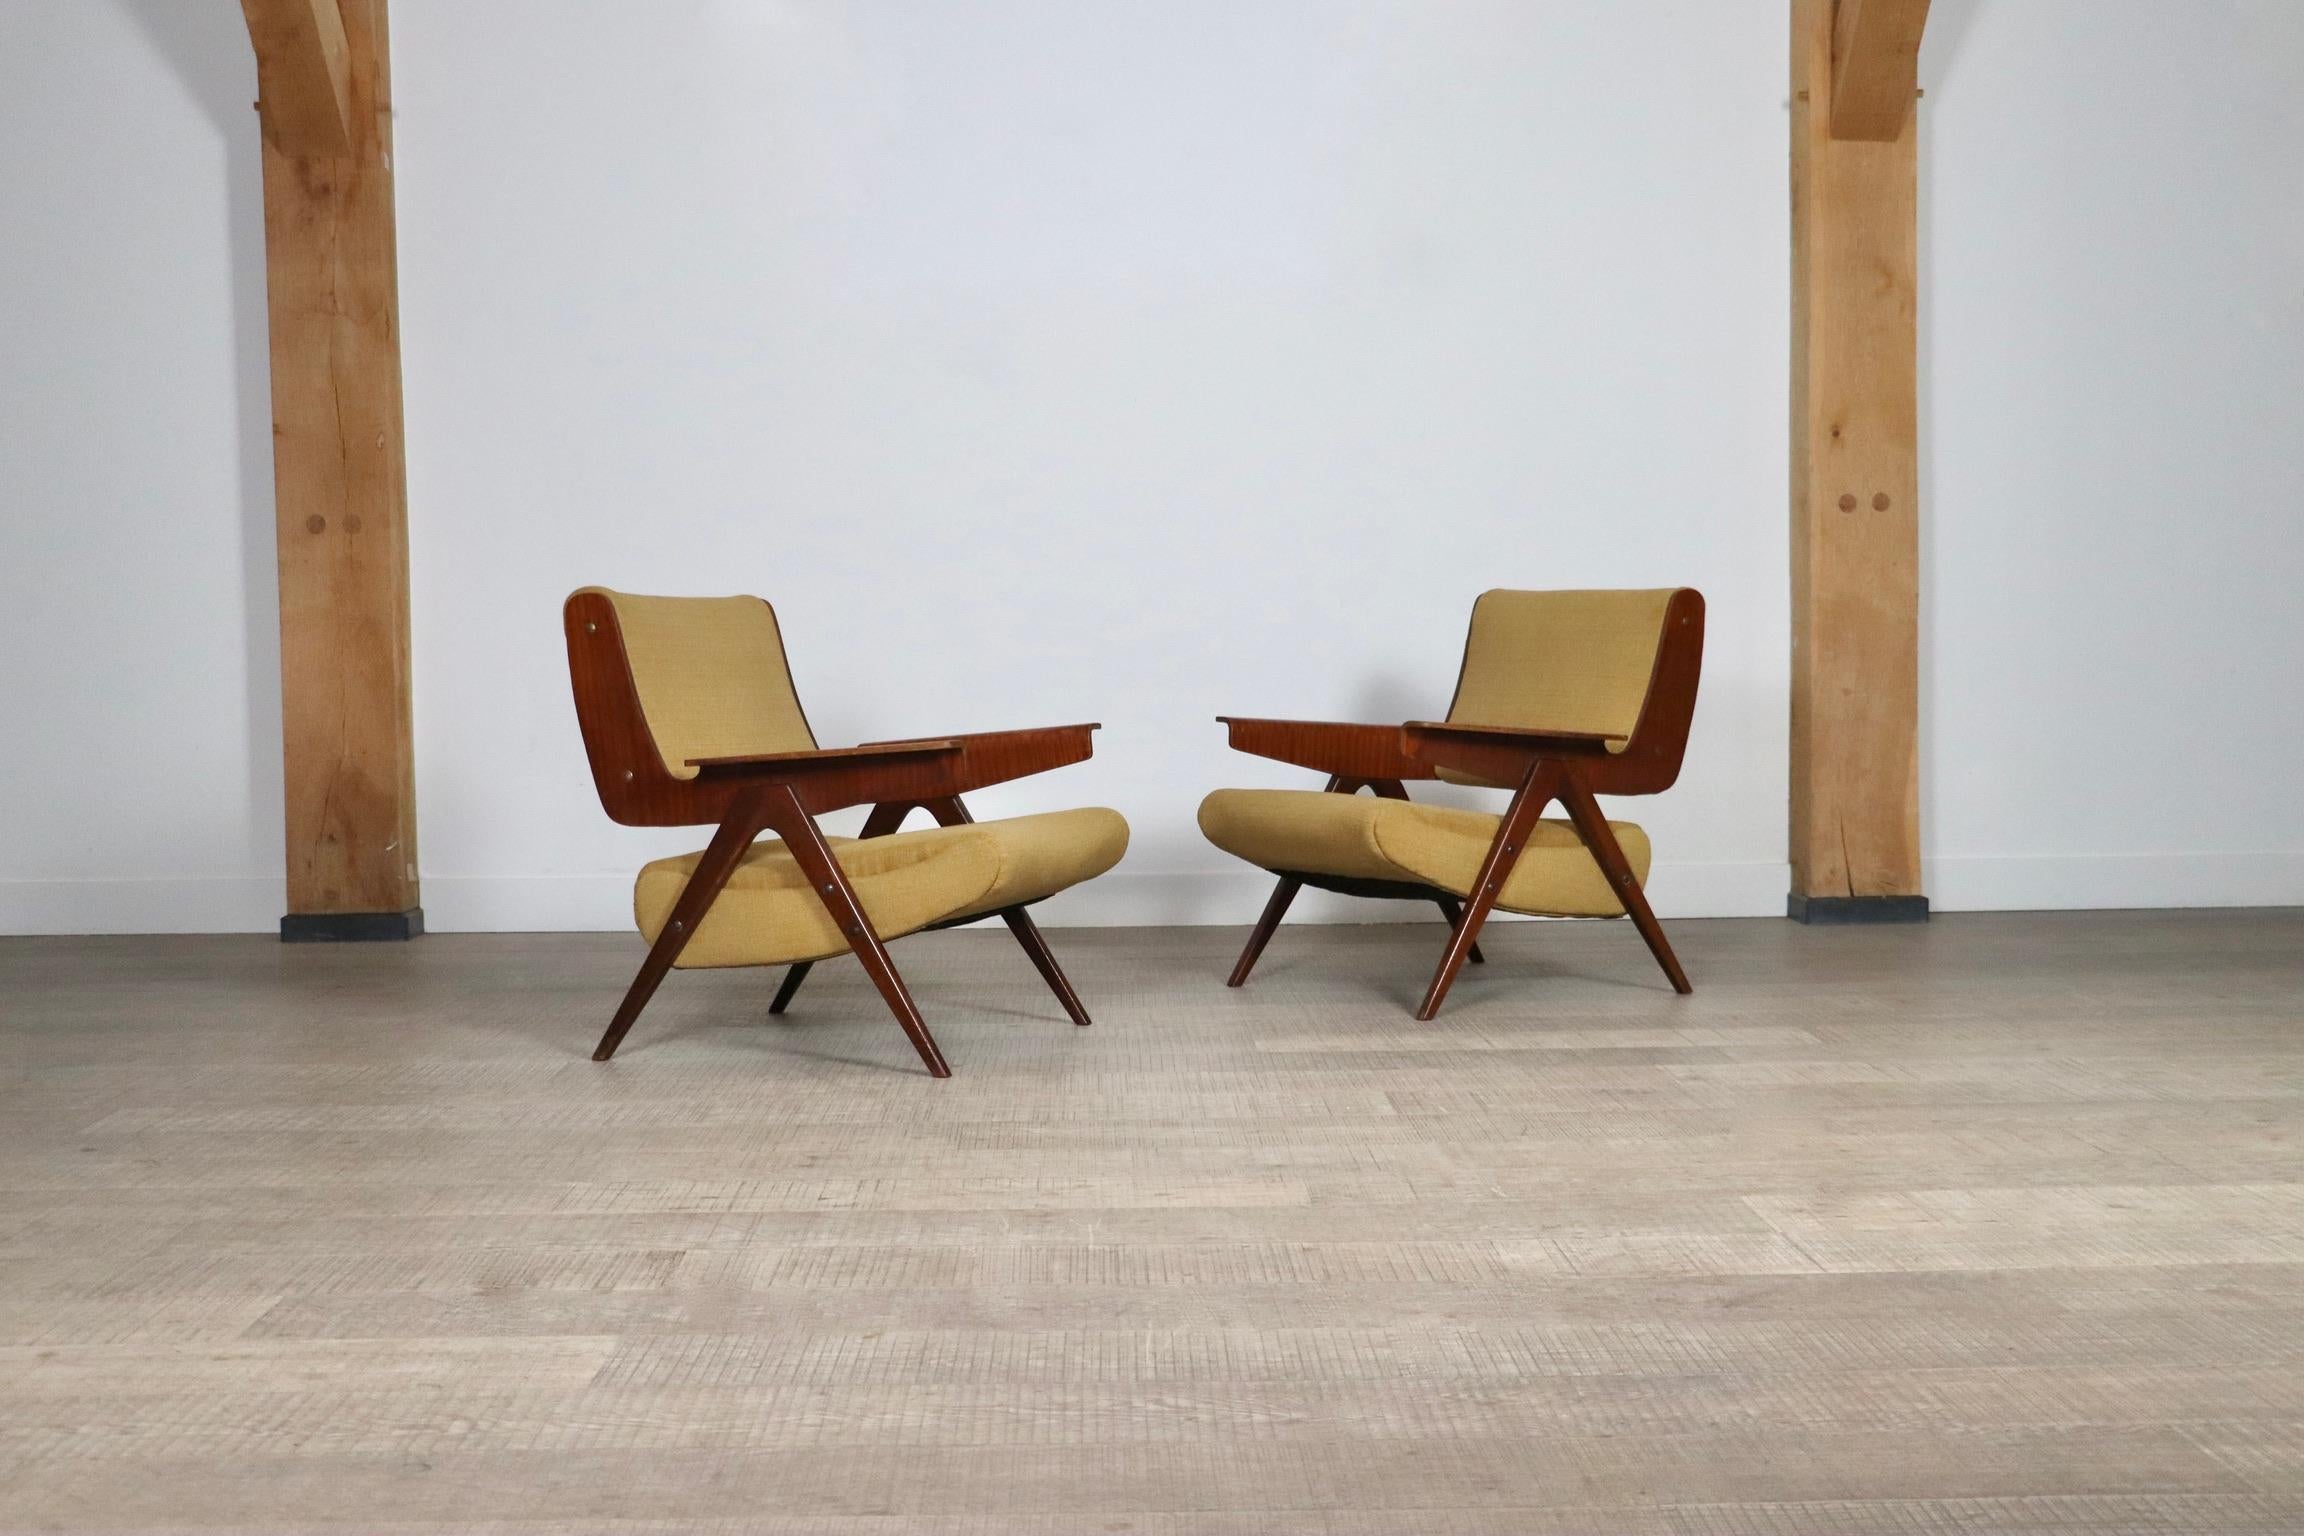 Pair Of Gianfranco Frattini Model 831 Lounge Chairs For Cassina, 1950s For Sale 6